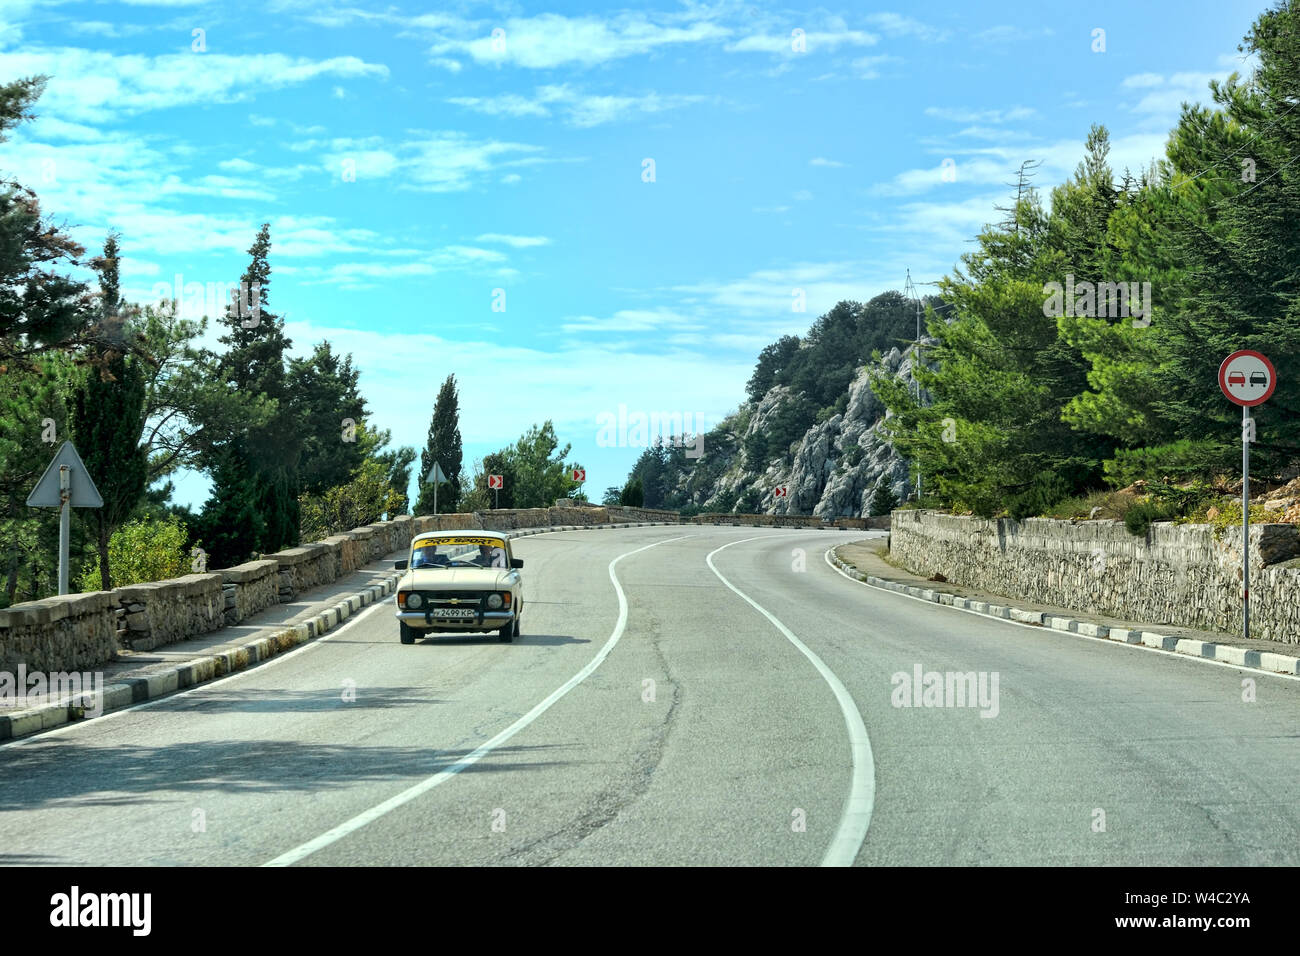 The Old Soviet Car on a Curve of South Coast Highway Stock Photo